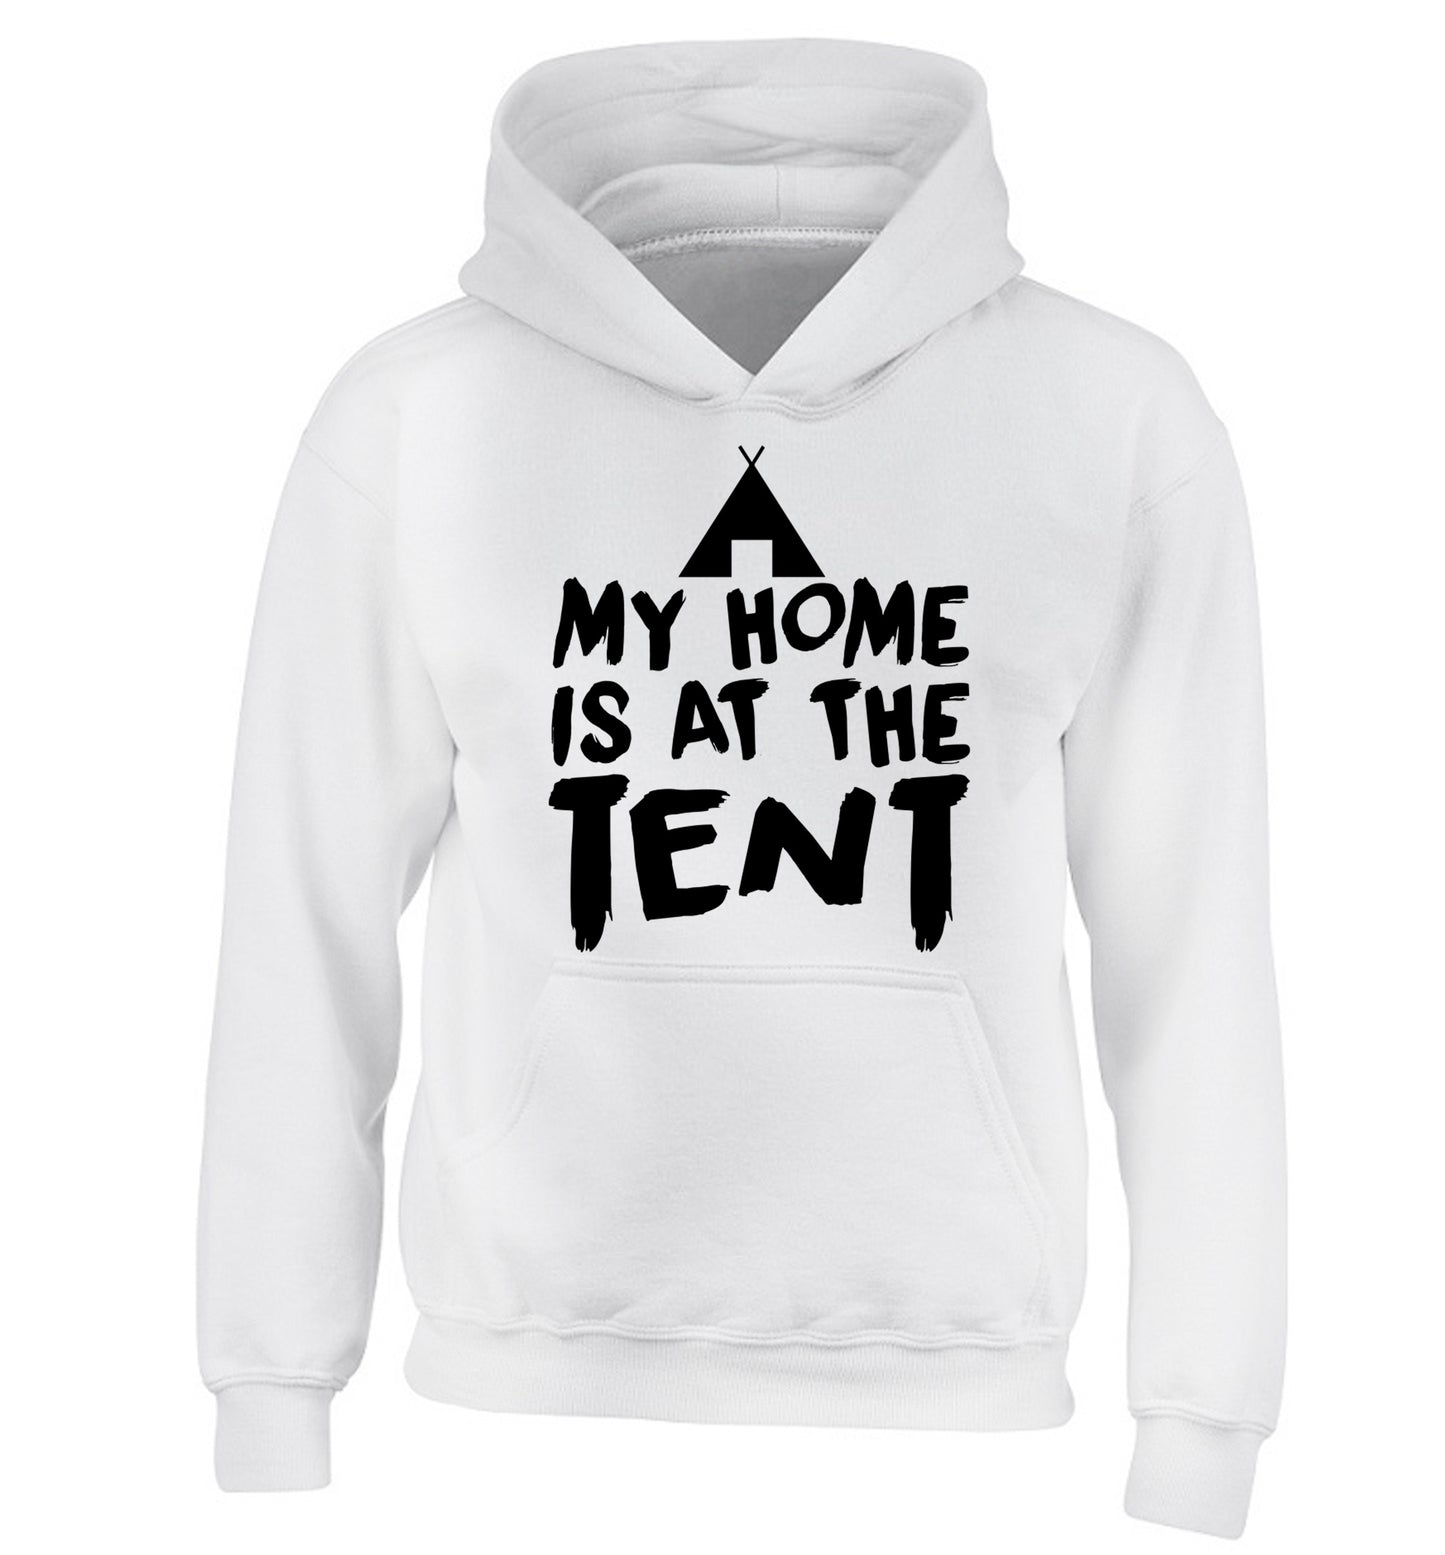 My home is at the tent children's white hoodie 12-14 Years